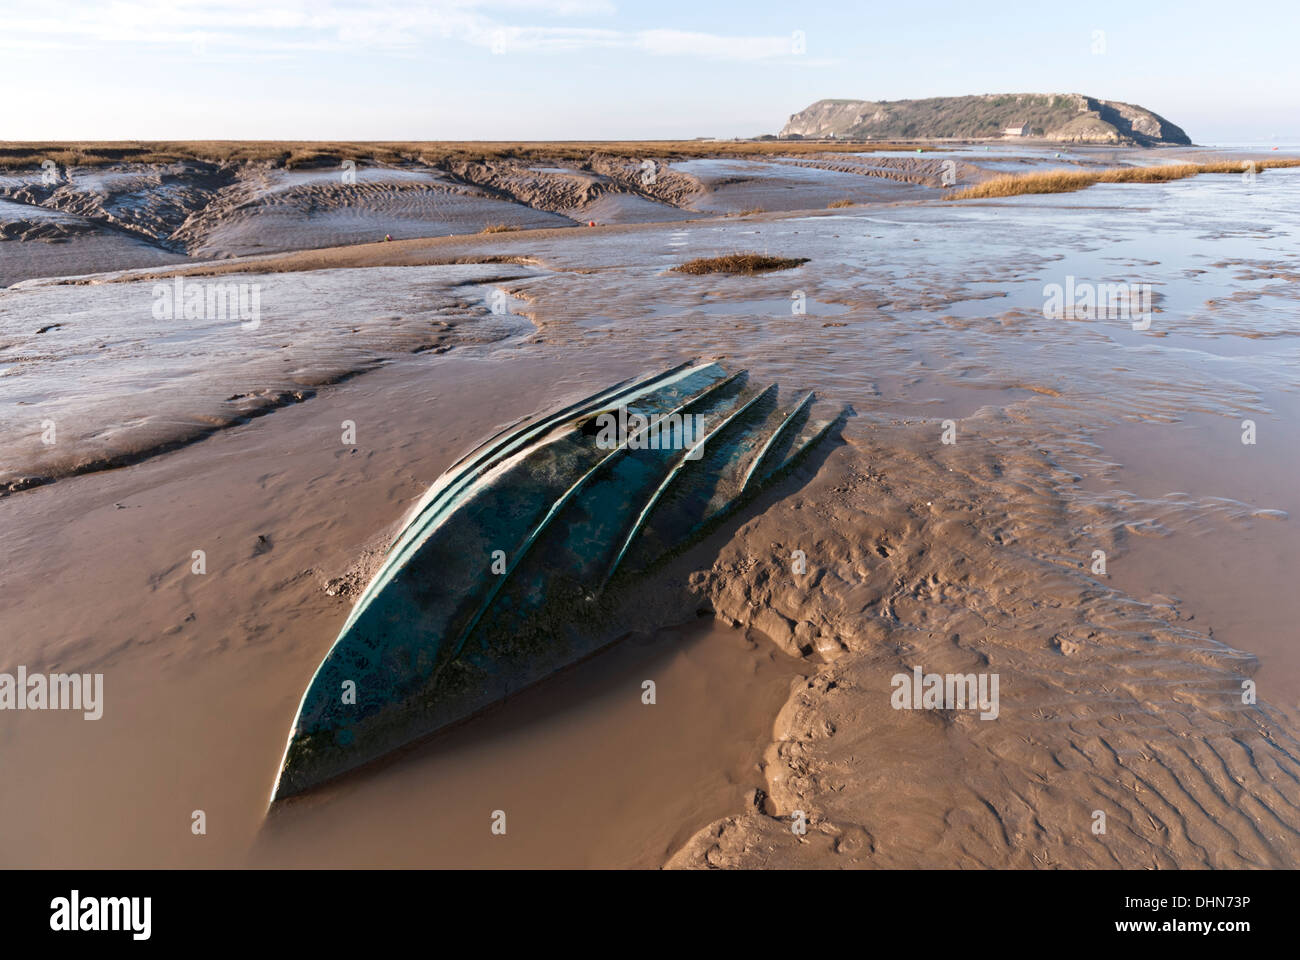 Mud flats at Uphill on the River Axe with a small boat sunk into the dangerous Severn estuary mud, Brean Down in the distance. Stock Photo